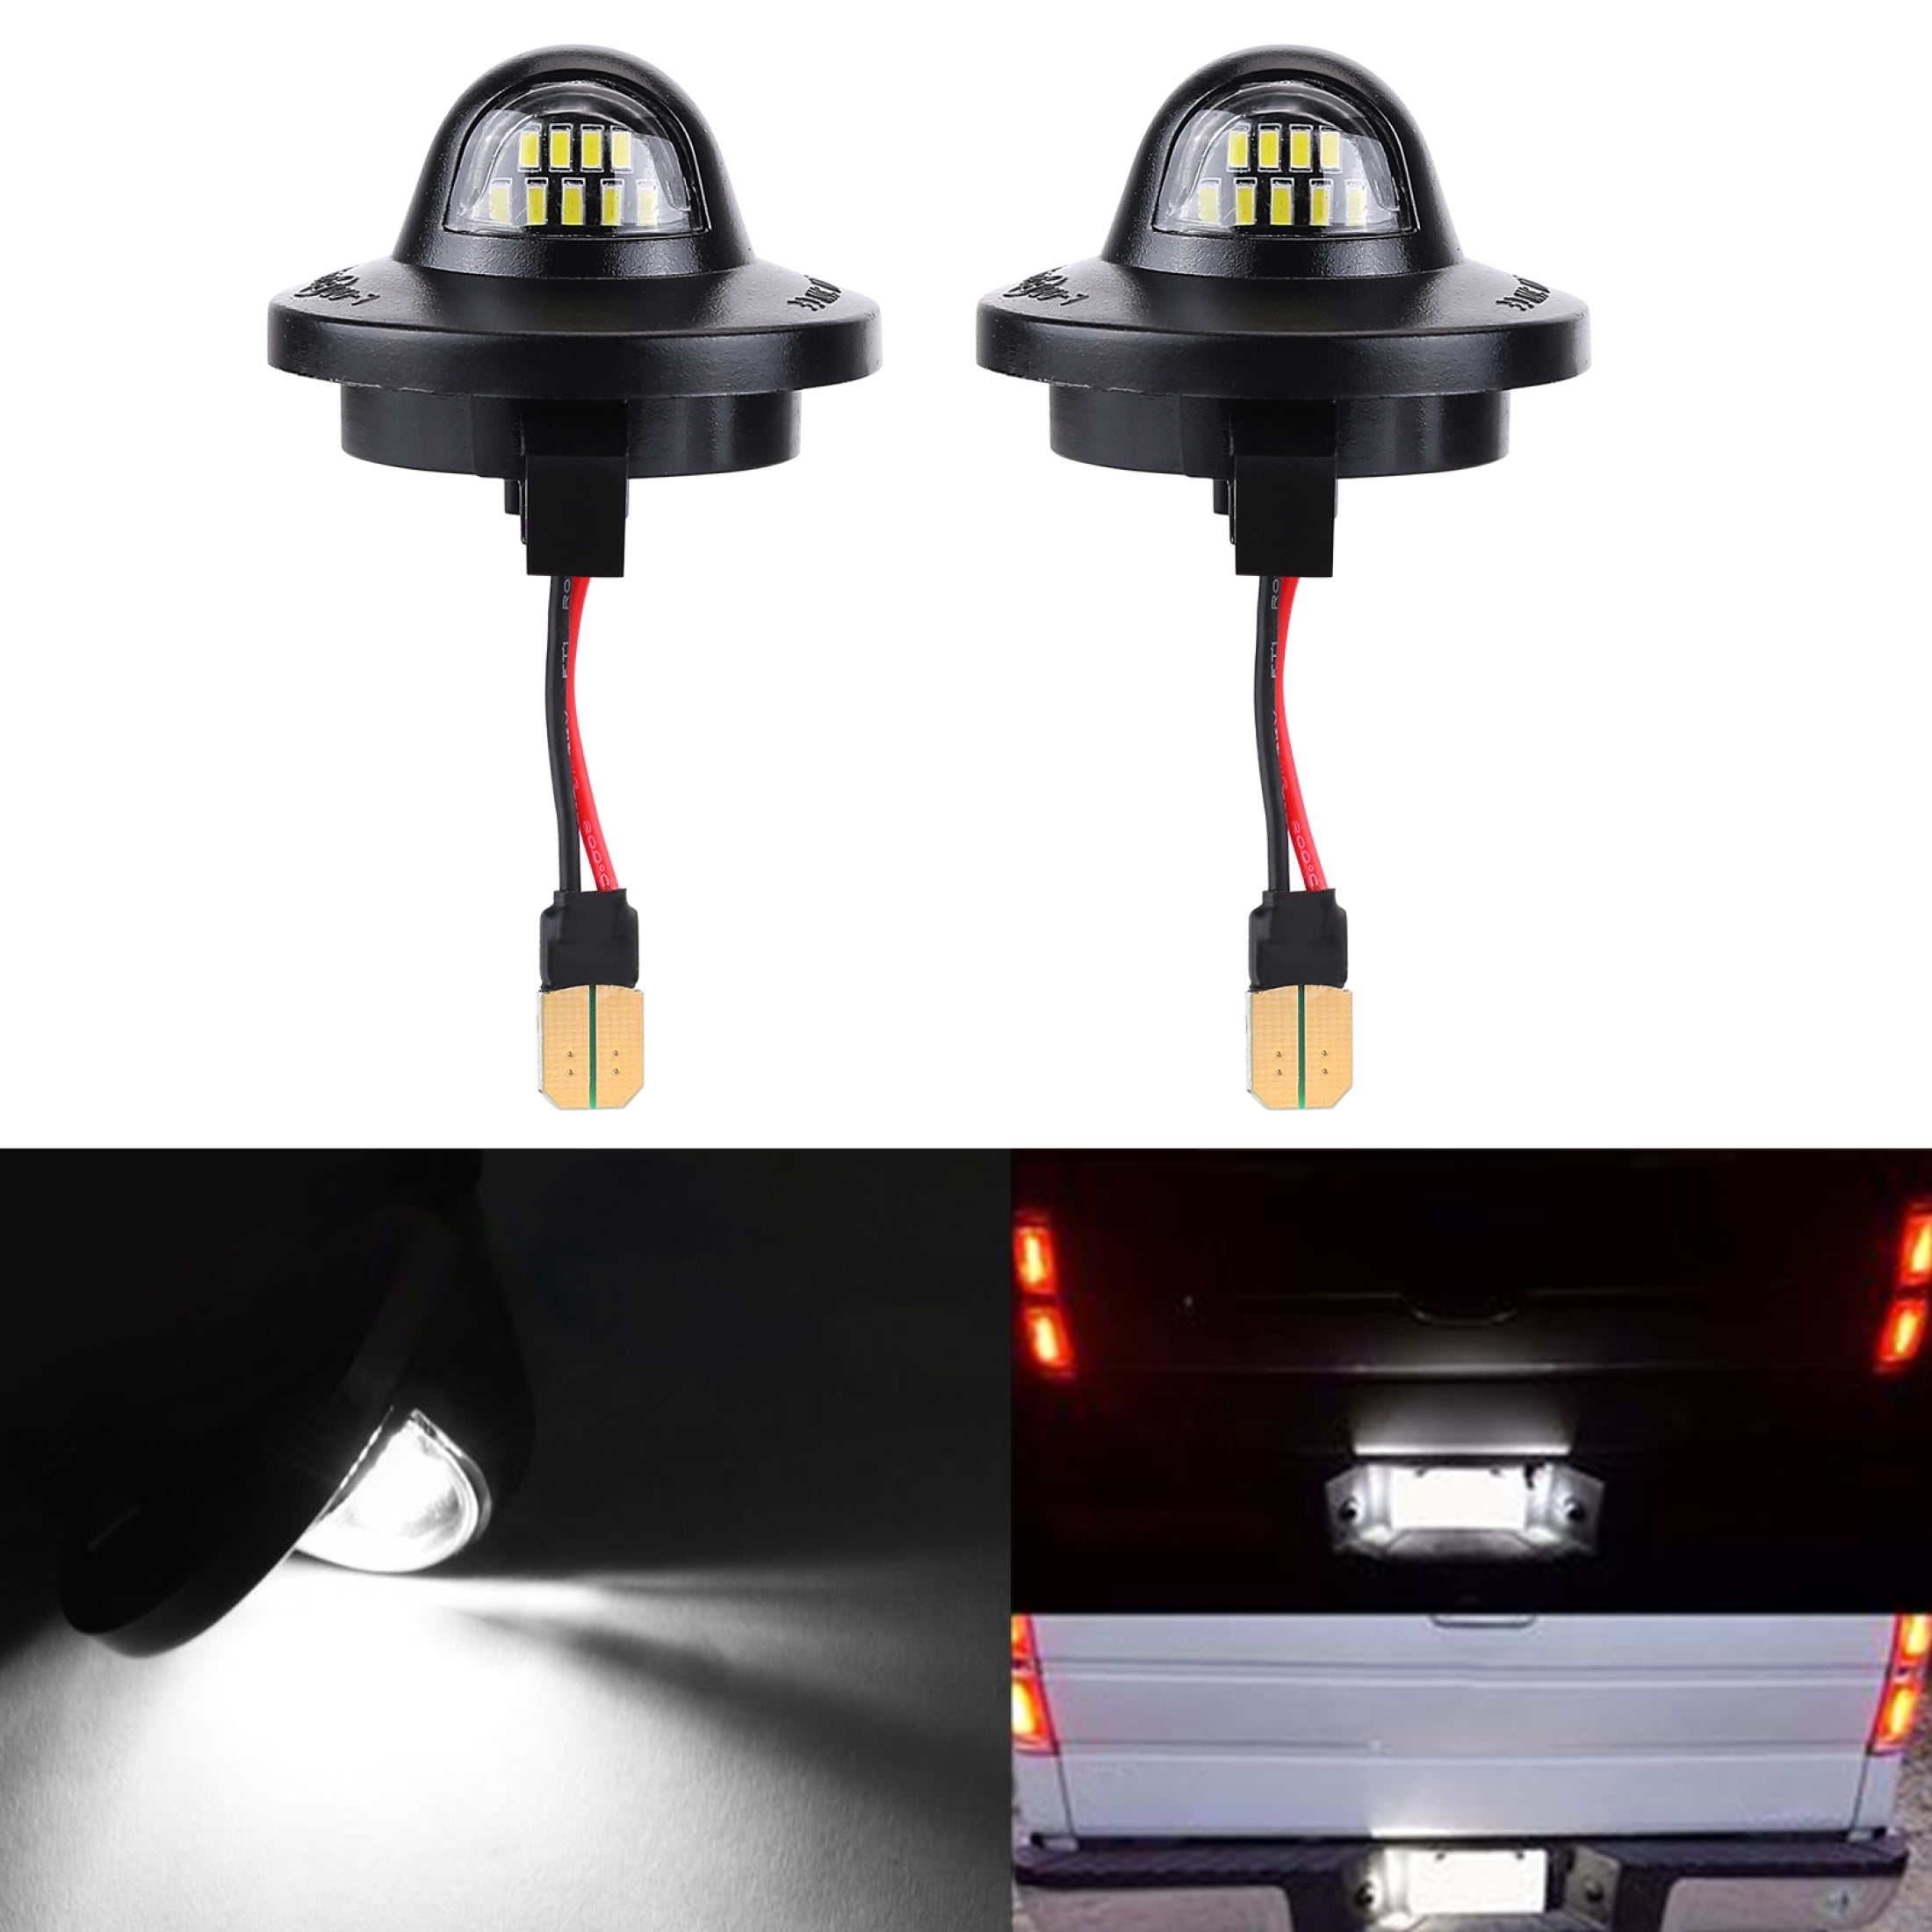 MbuyDIY LED License Plate Light Lamp Assembly with Red OLED Neon Tube  Compatible with F150 1990-2014, F250 F350 1999-2016, Ranger 1983-2011,  Excursion